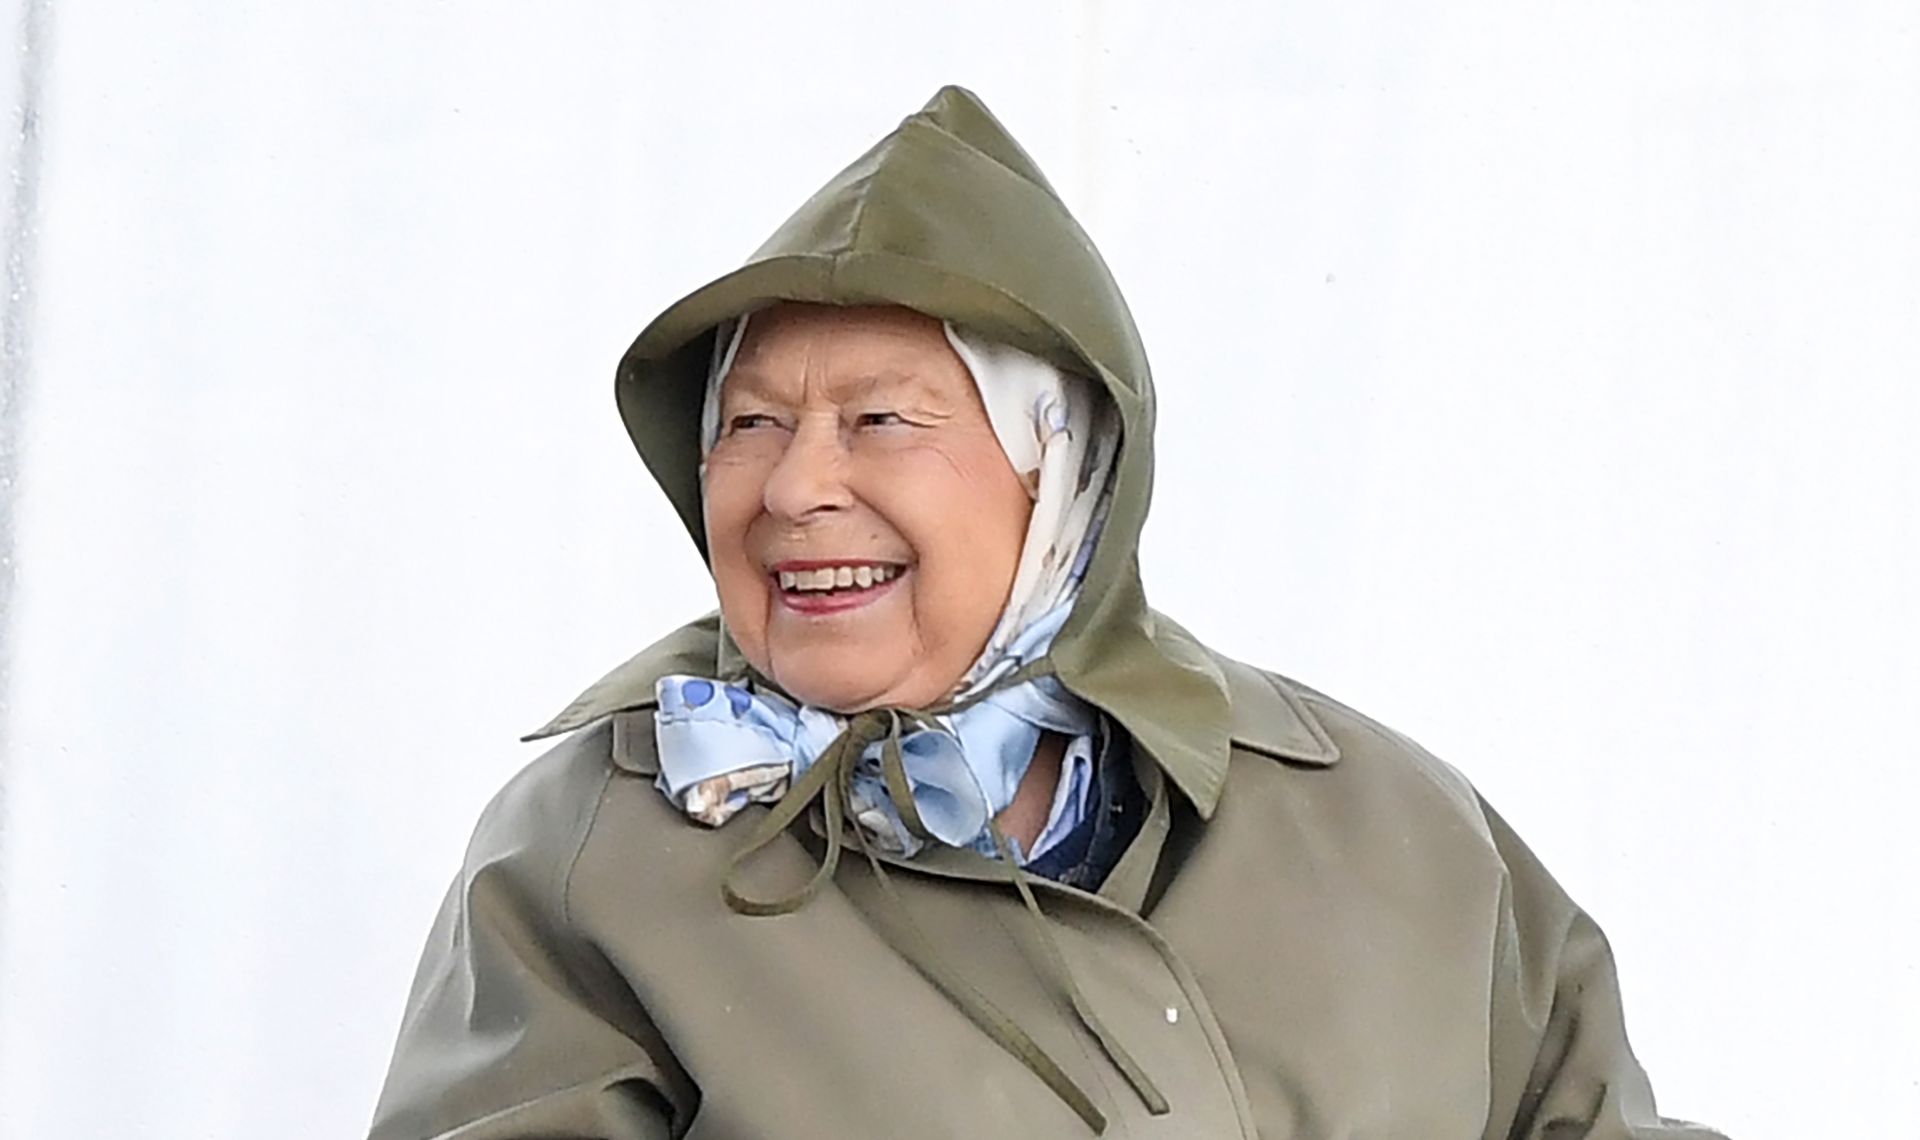 epa07555330 The Queen Elizabeth II smiles during the Royal Windsor Horse Show, in Windsor, Britain, 08 May 2019. The event is the United Kingdom's largest outdoor horse show with international competitions in three different equestrian disciplines.  EPA/FACUNDO ARRIZABALAGA